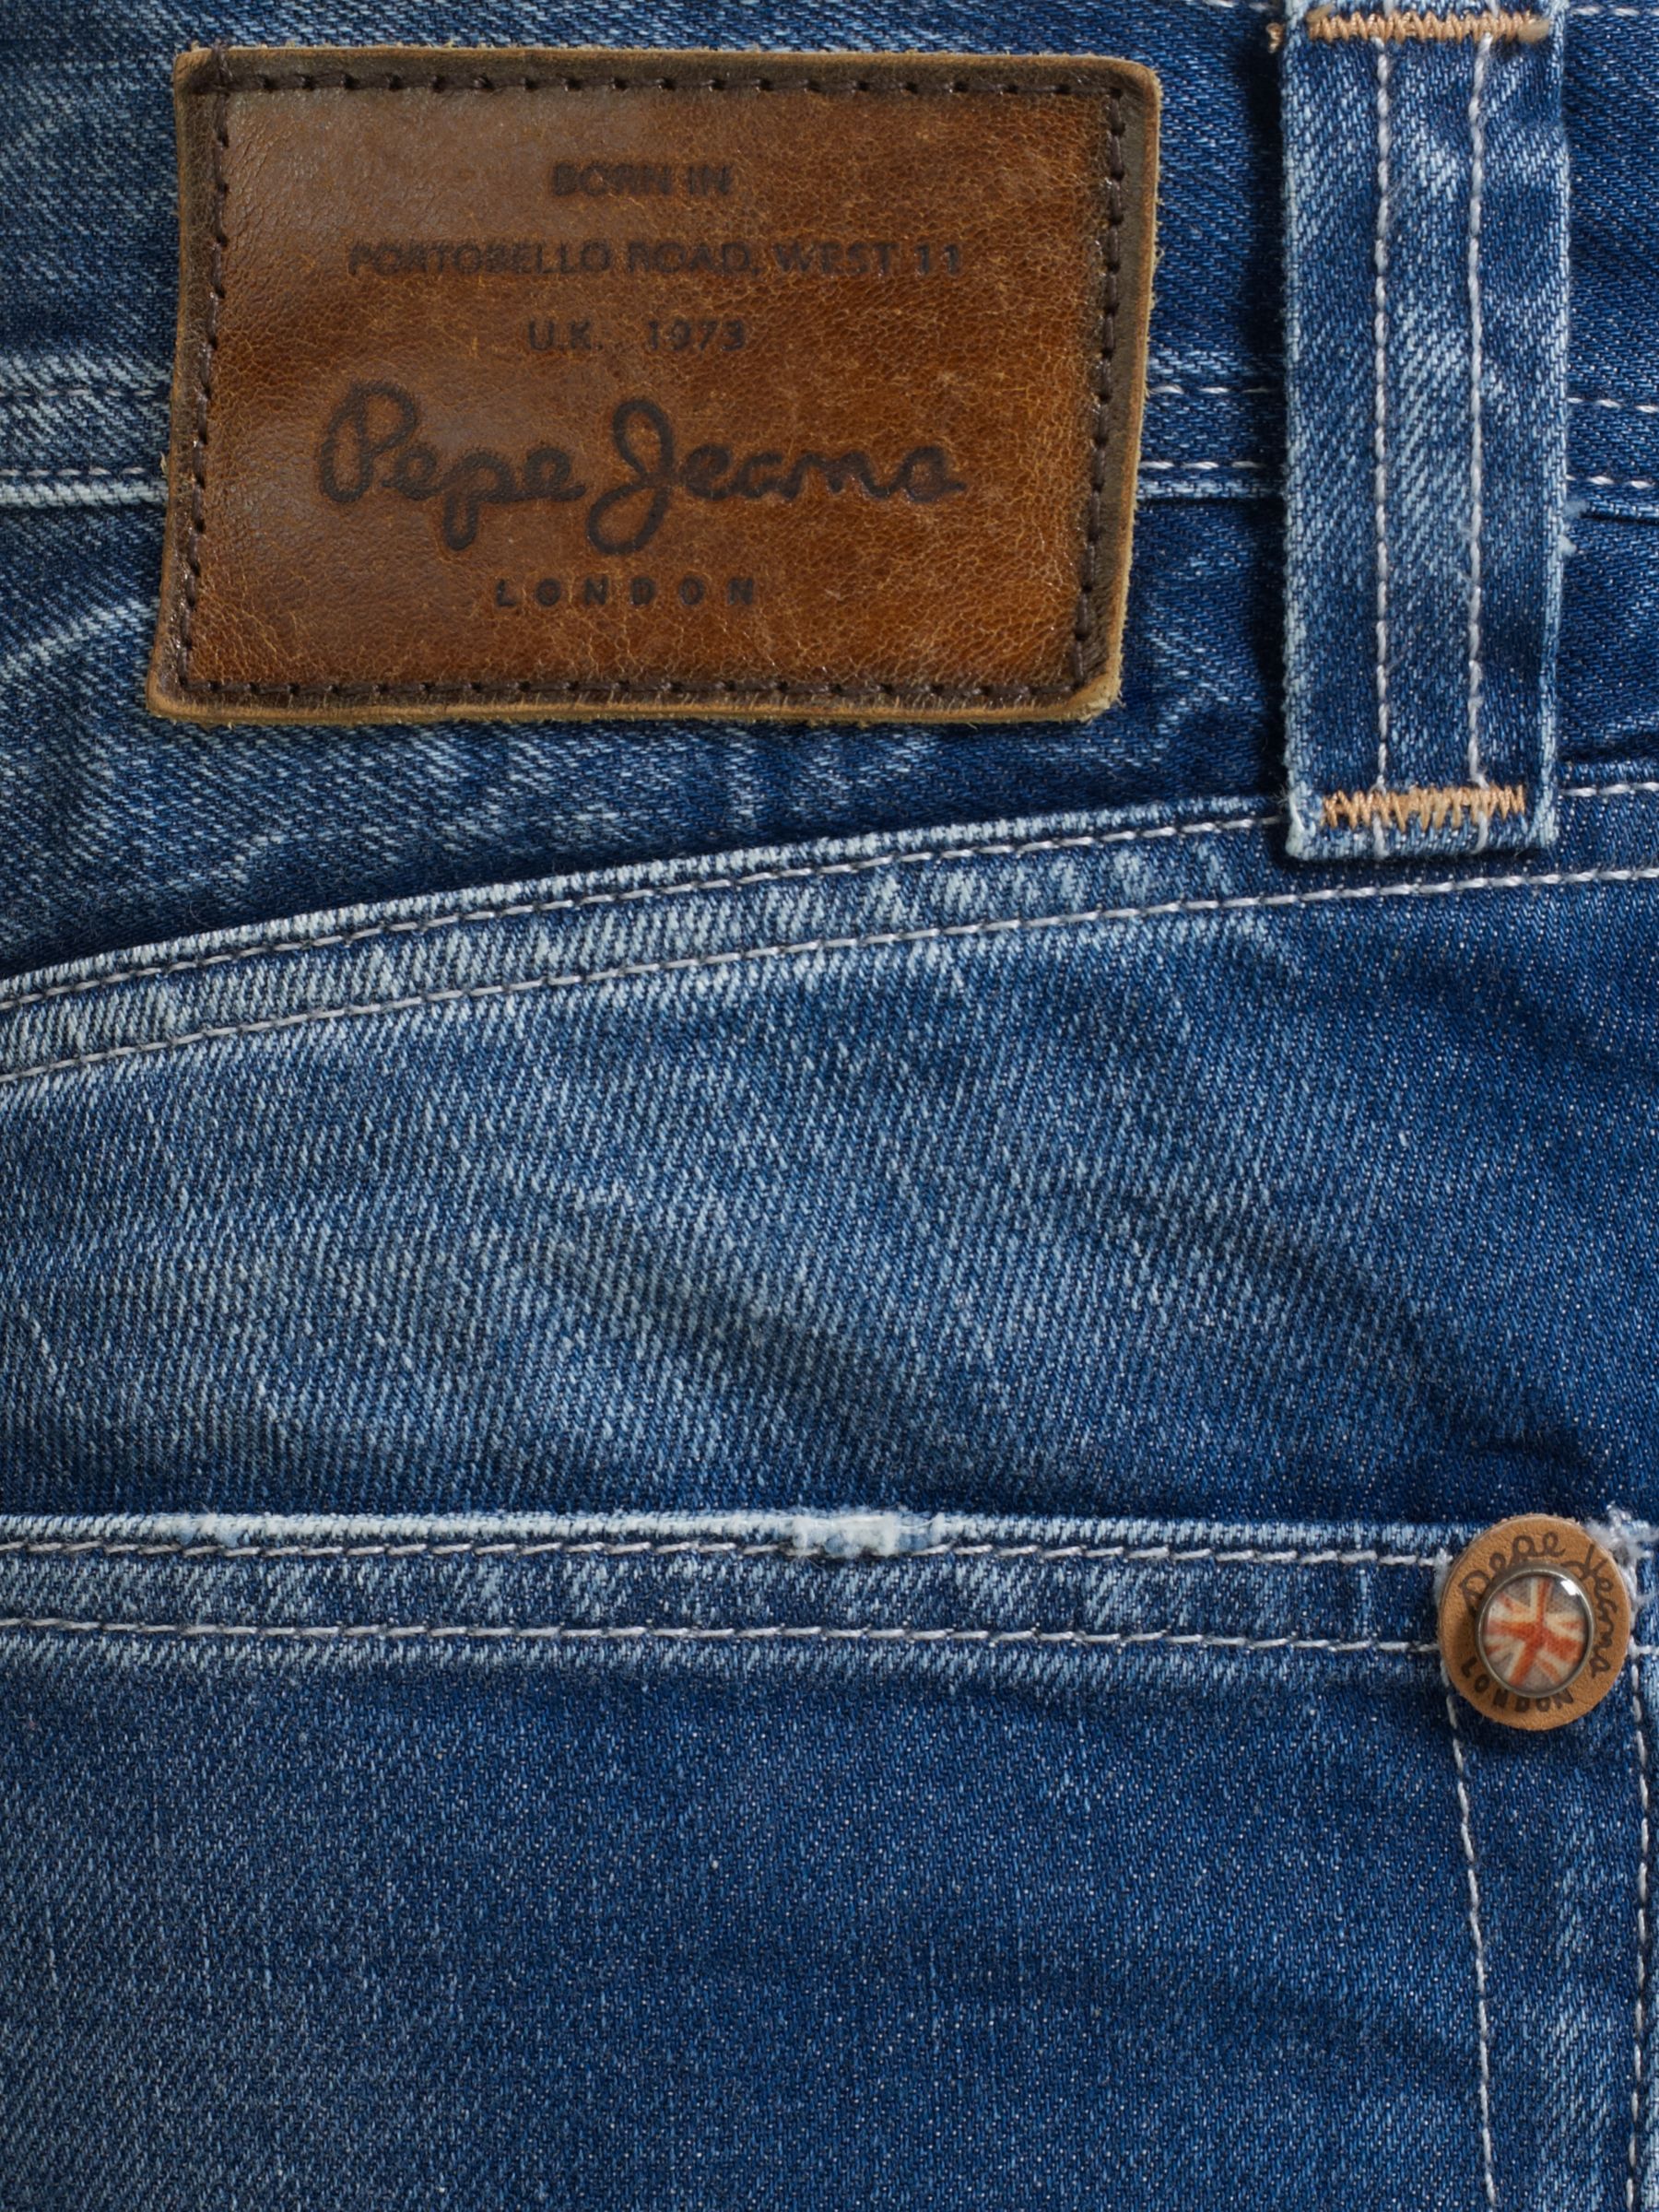 pepe jeans cane slim fit